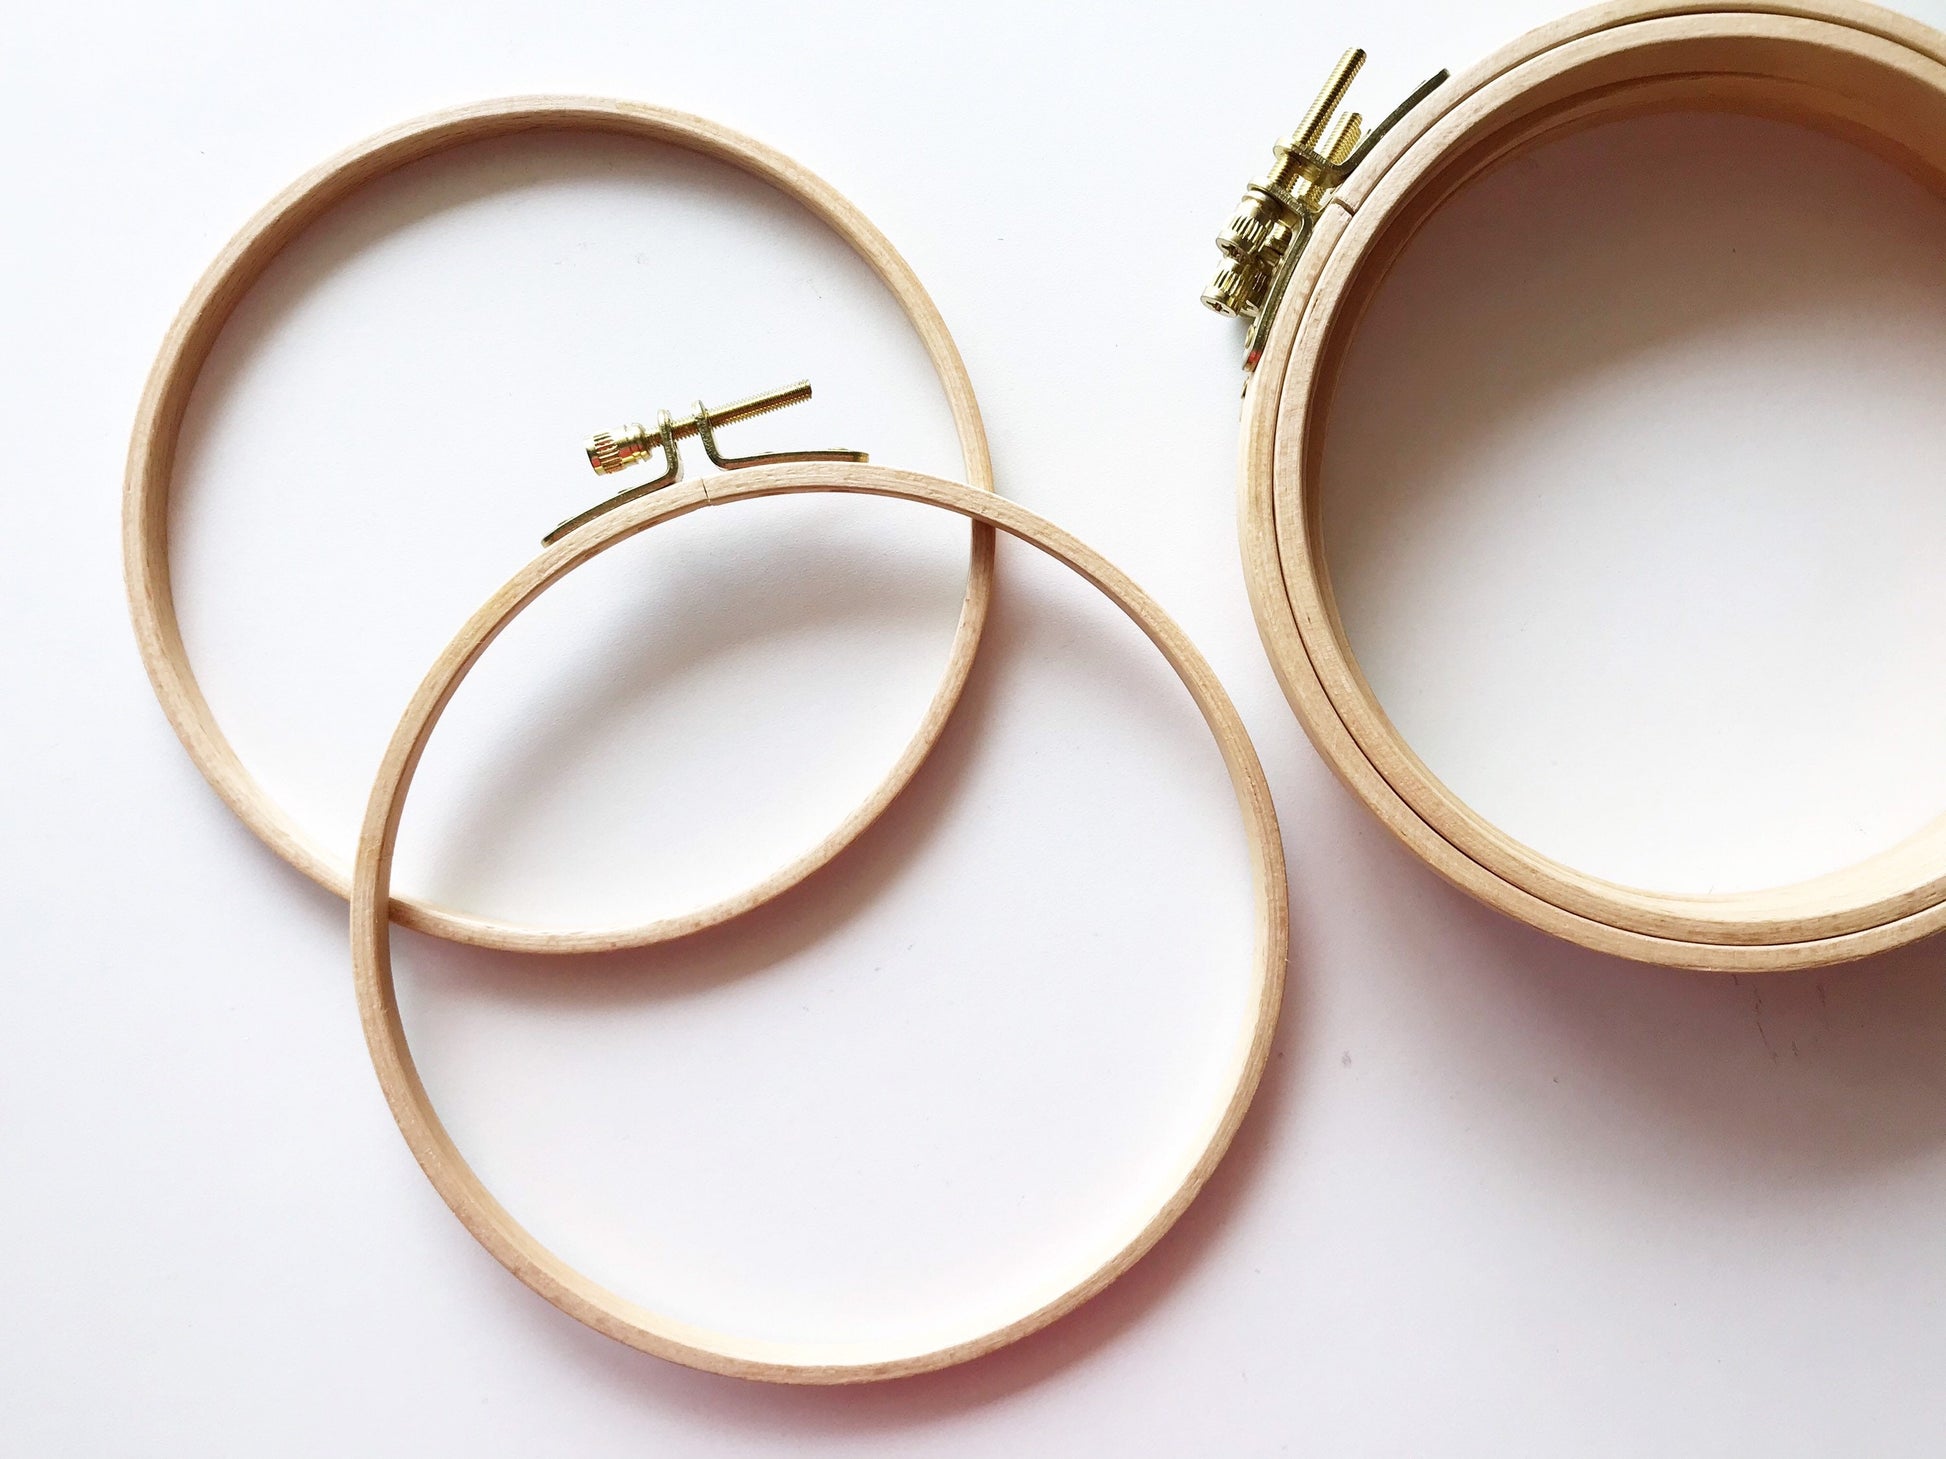 DMC 6 Oval Wooden Embroidery Hoop